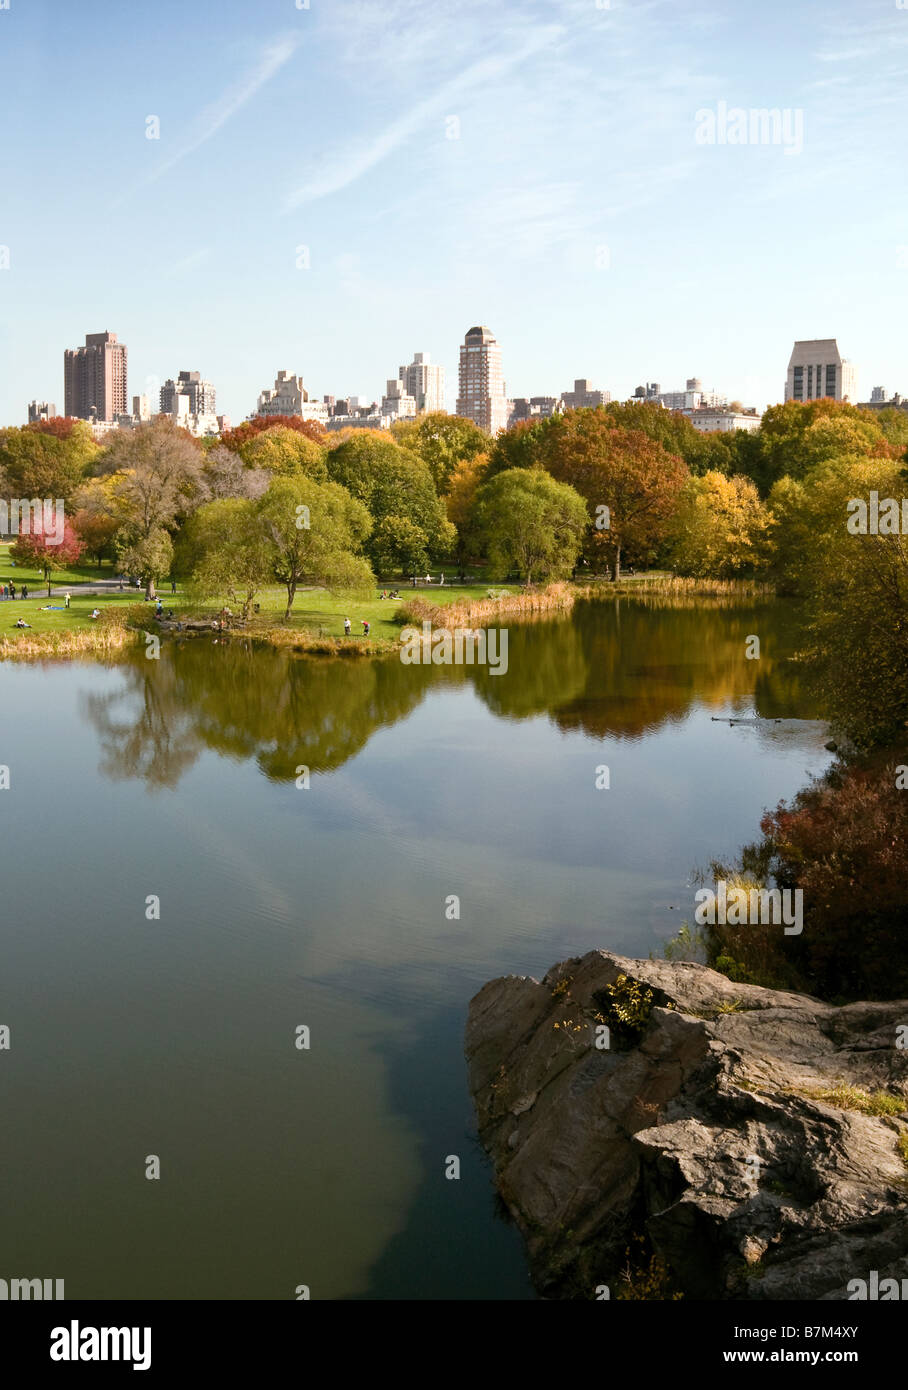 The view from Belvedere Castle over Belvedere lake towards Fifth Avenue, Central Park, New York, USA. Nov 2008 Stock Photo